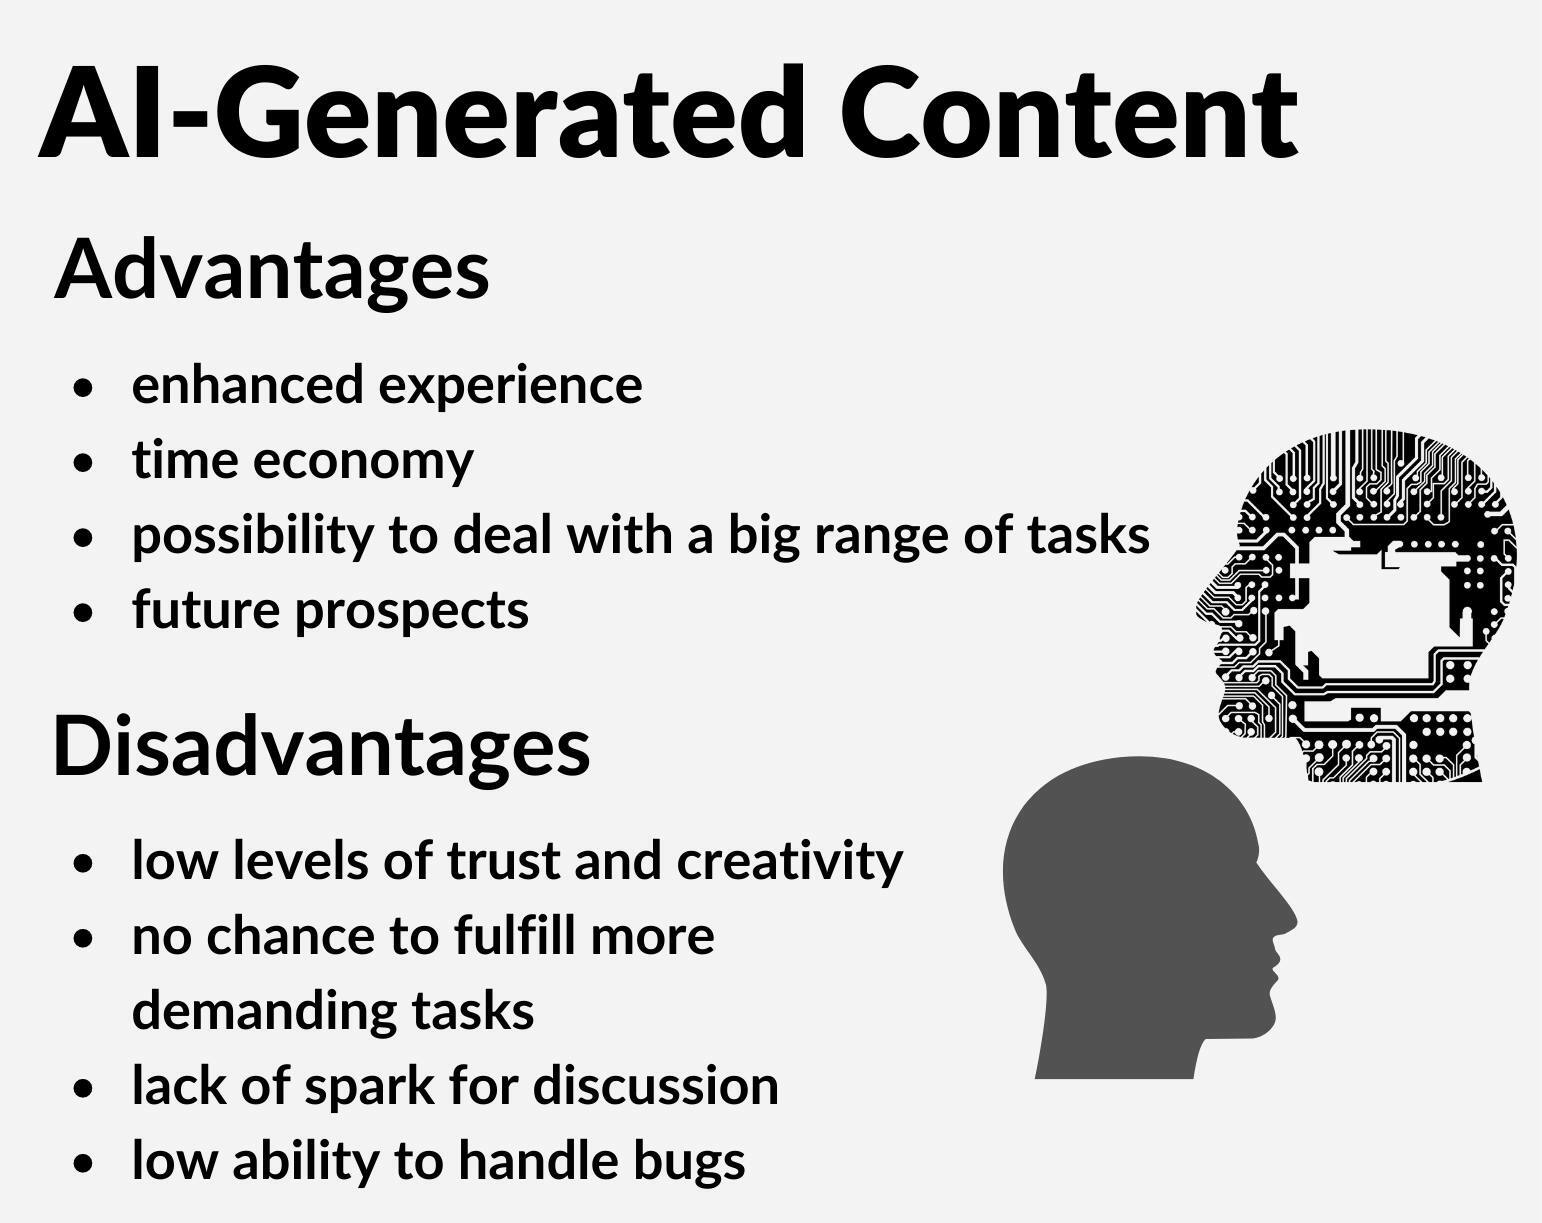 AI-Generated Content: pros and cons